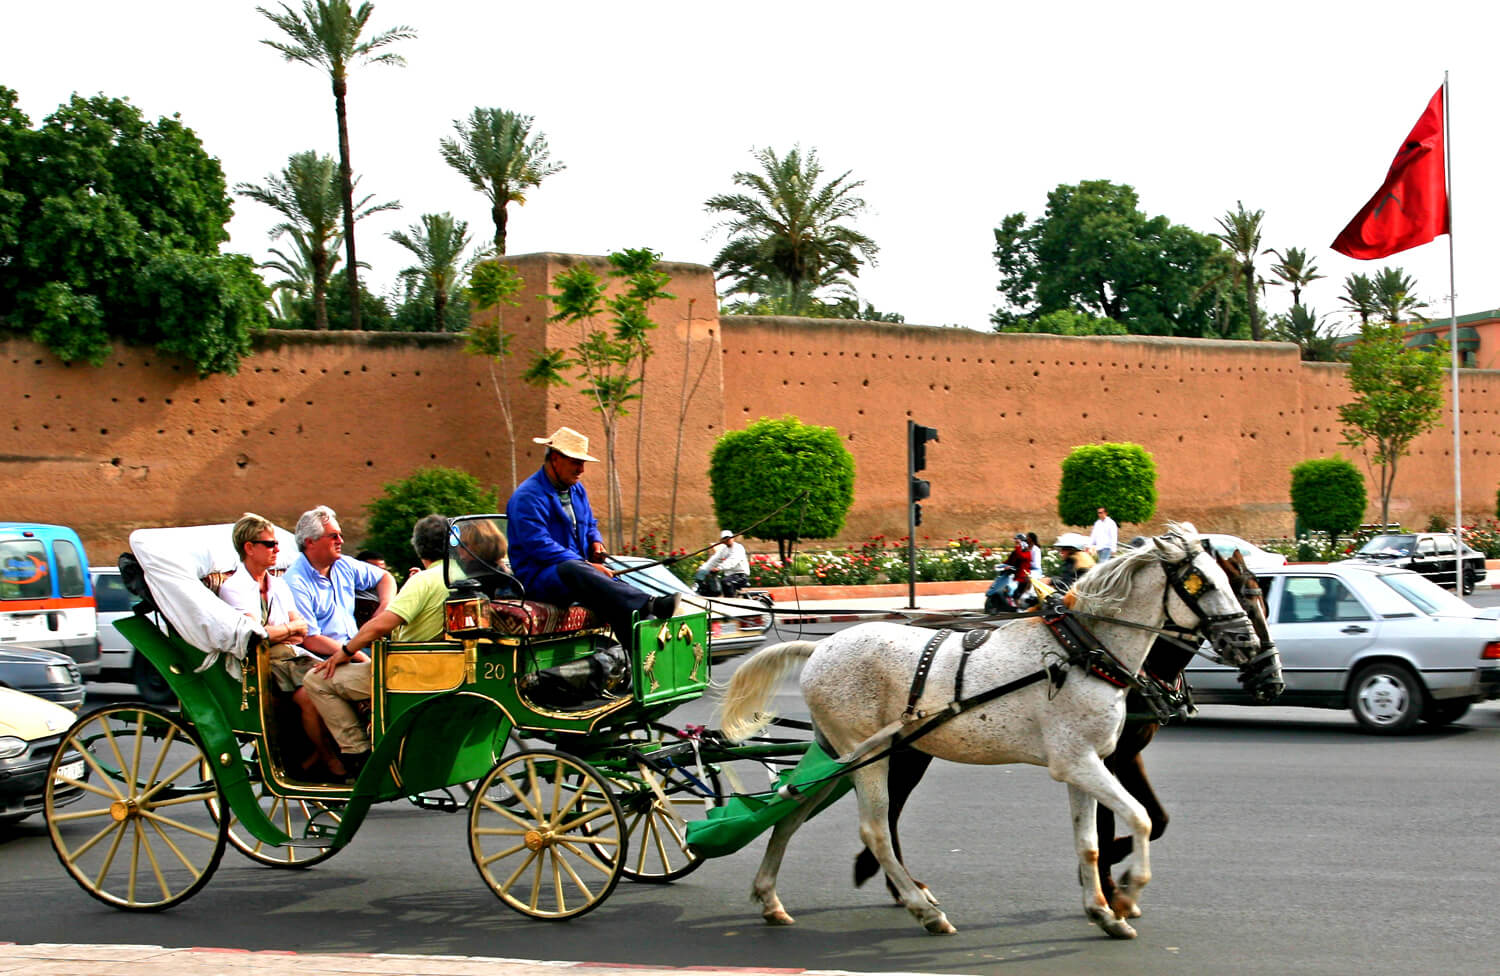 Marrakech Excurions, Private guided visit of Marrakech